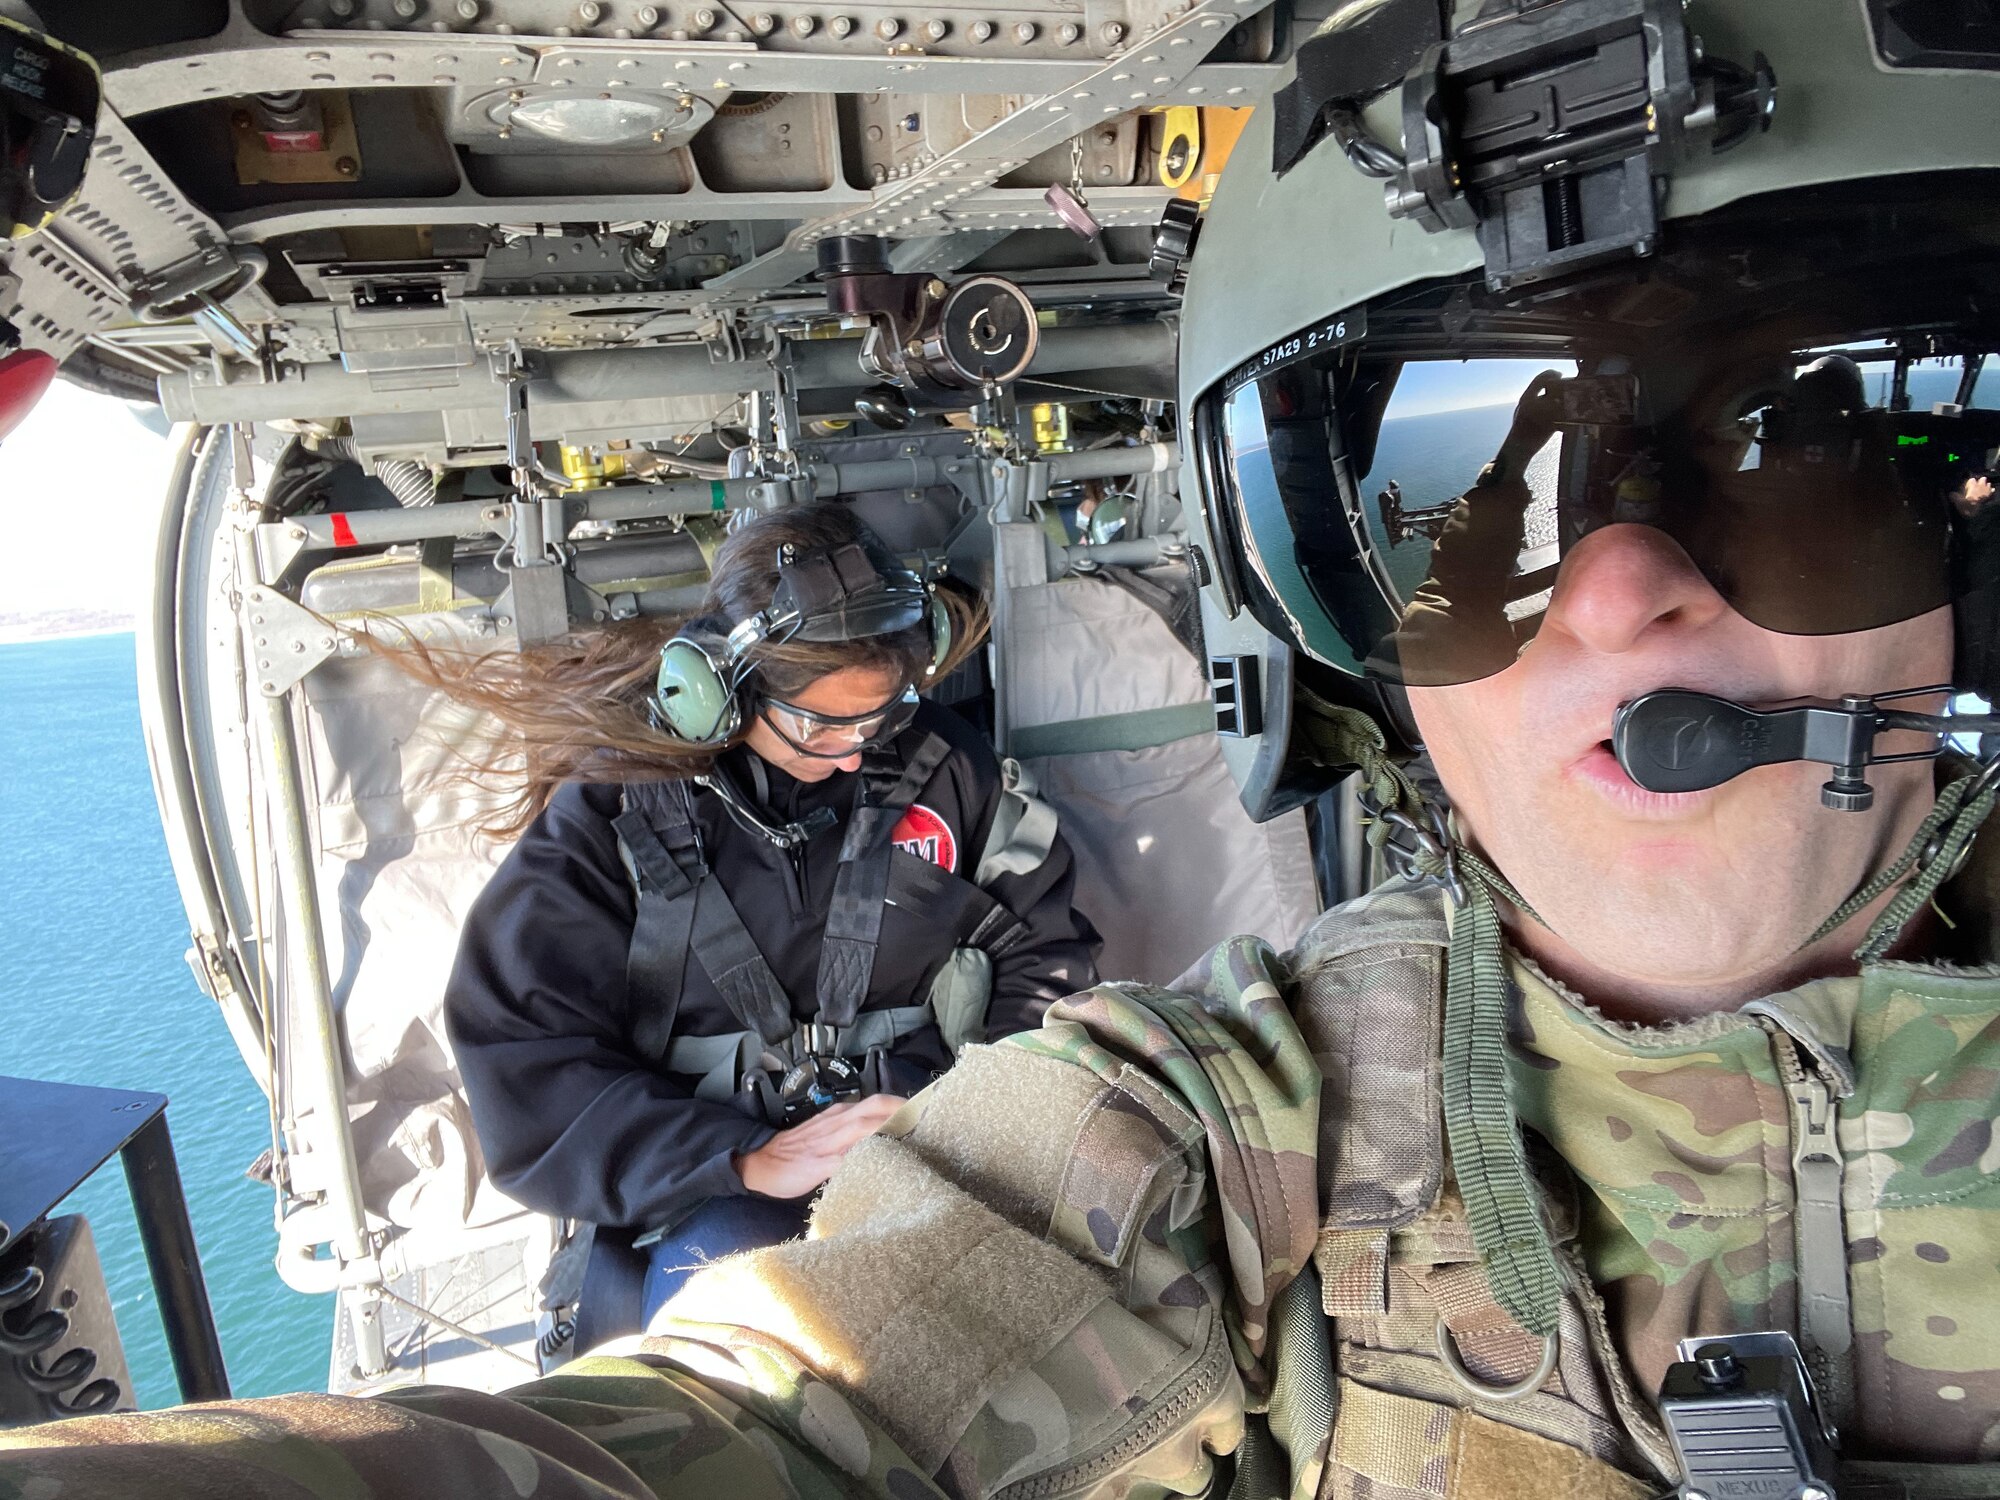 U.S. Air Force special mission aviator Tech. Sgt Patrick Williamson of the 106th Rescue Wing rides along guidance counselors from local schools near F.S. Gabreski Air National Guard Base in Westhampton Beach, N.Y. on Thursday Nov. 10.